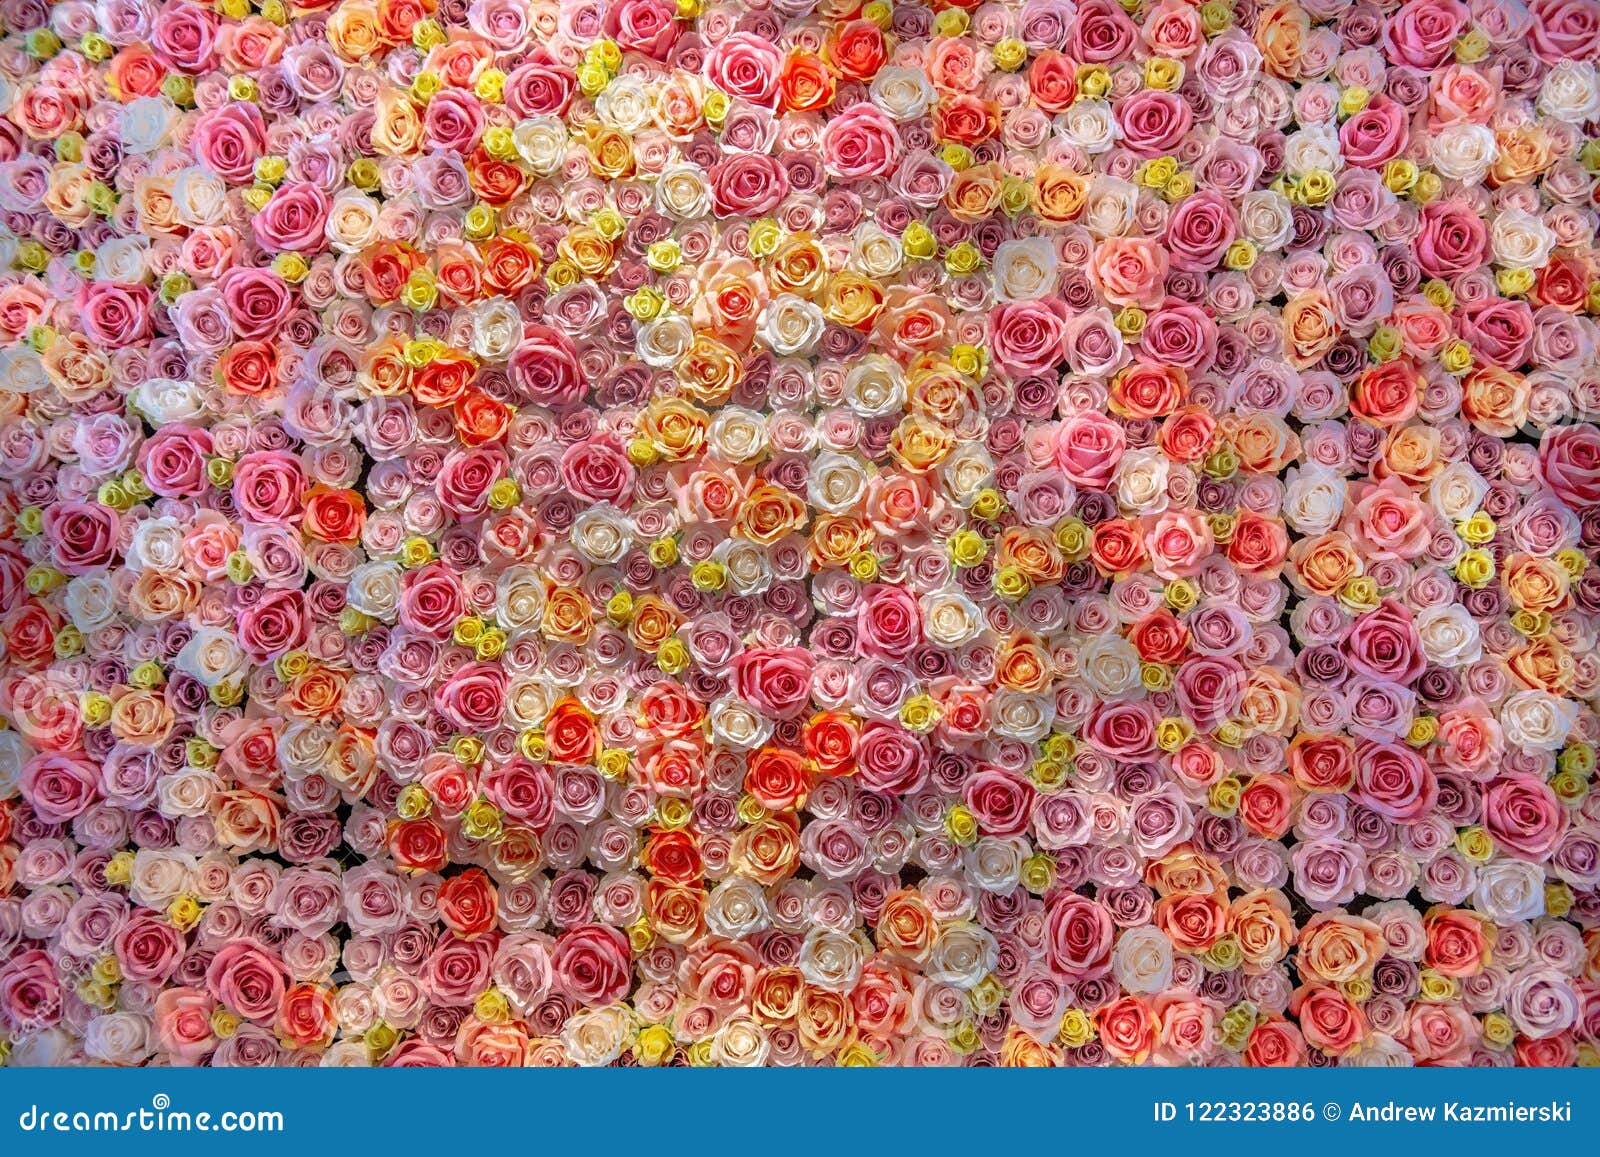 Wall of Roses Background stock photo. Image of flowers - 122323886